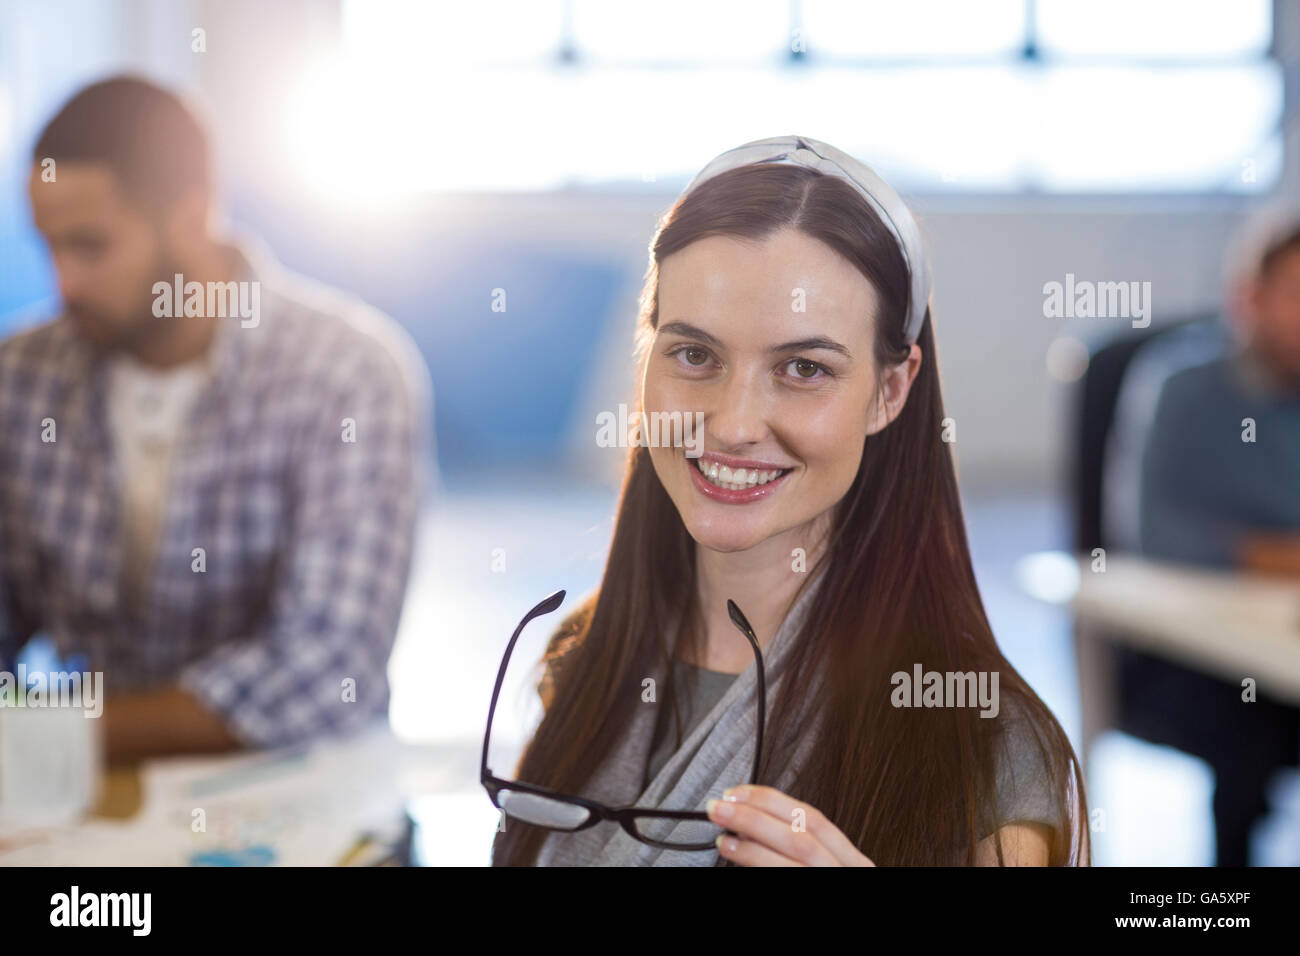 Smiling businesswoman holding eyeglasses at office Banque D'Images